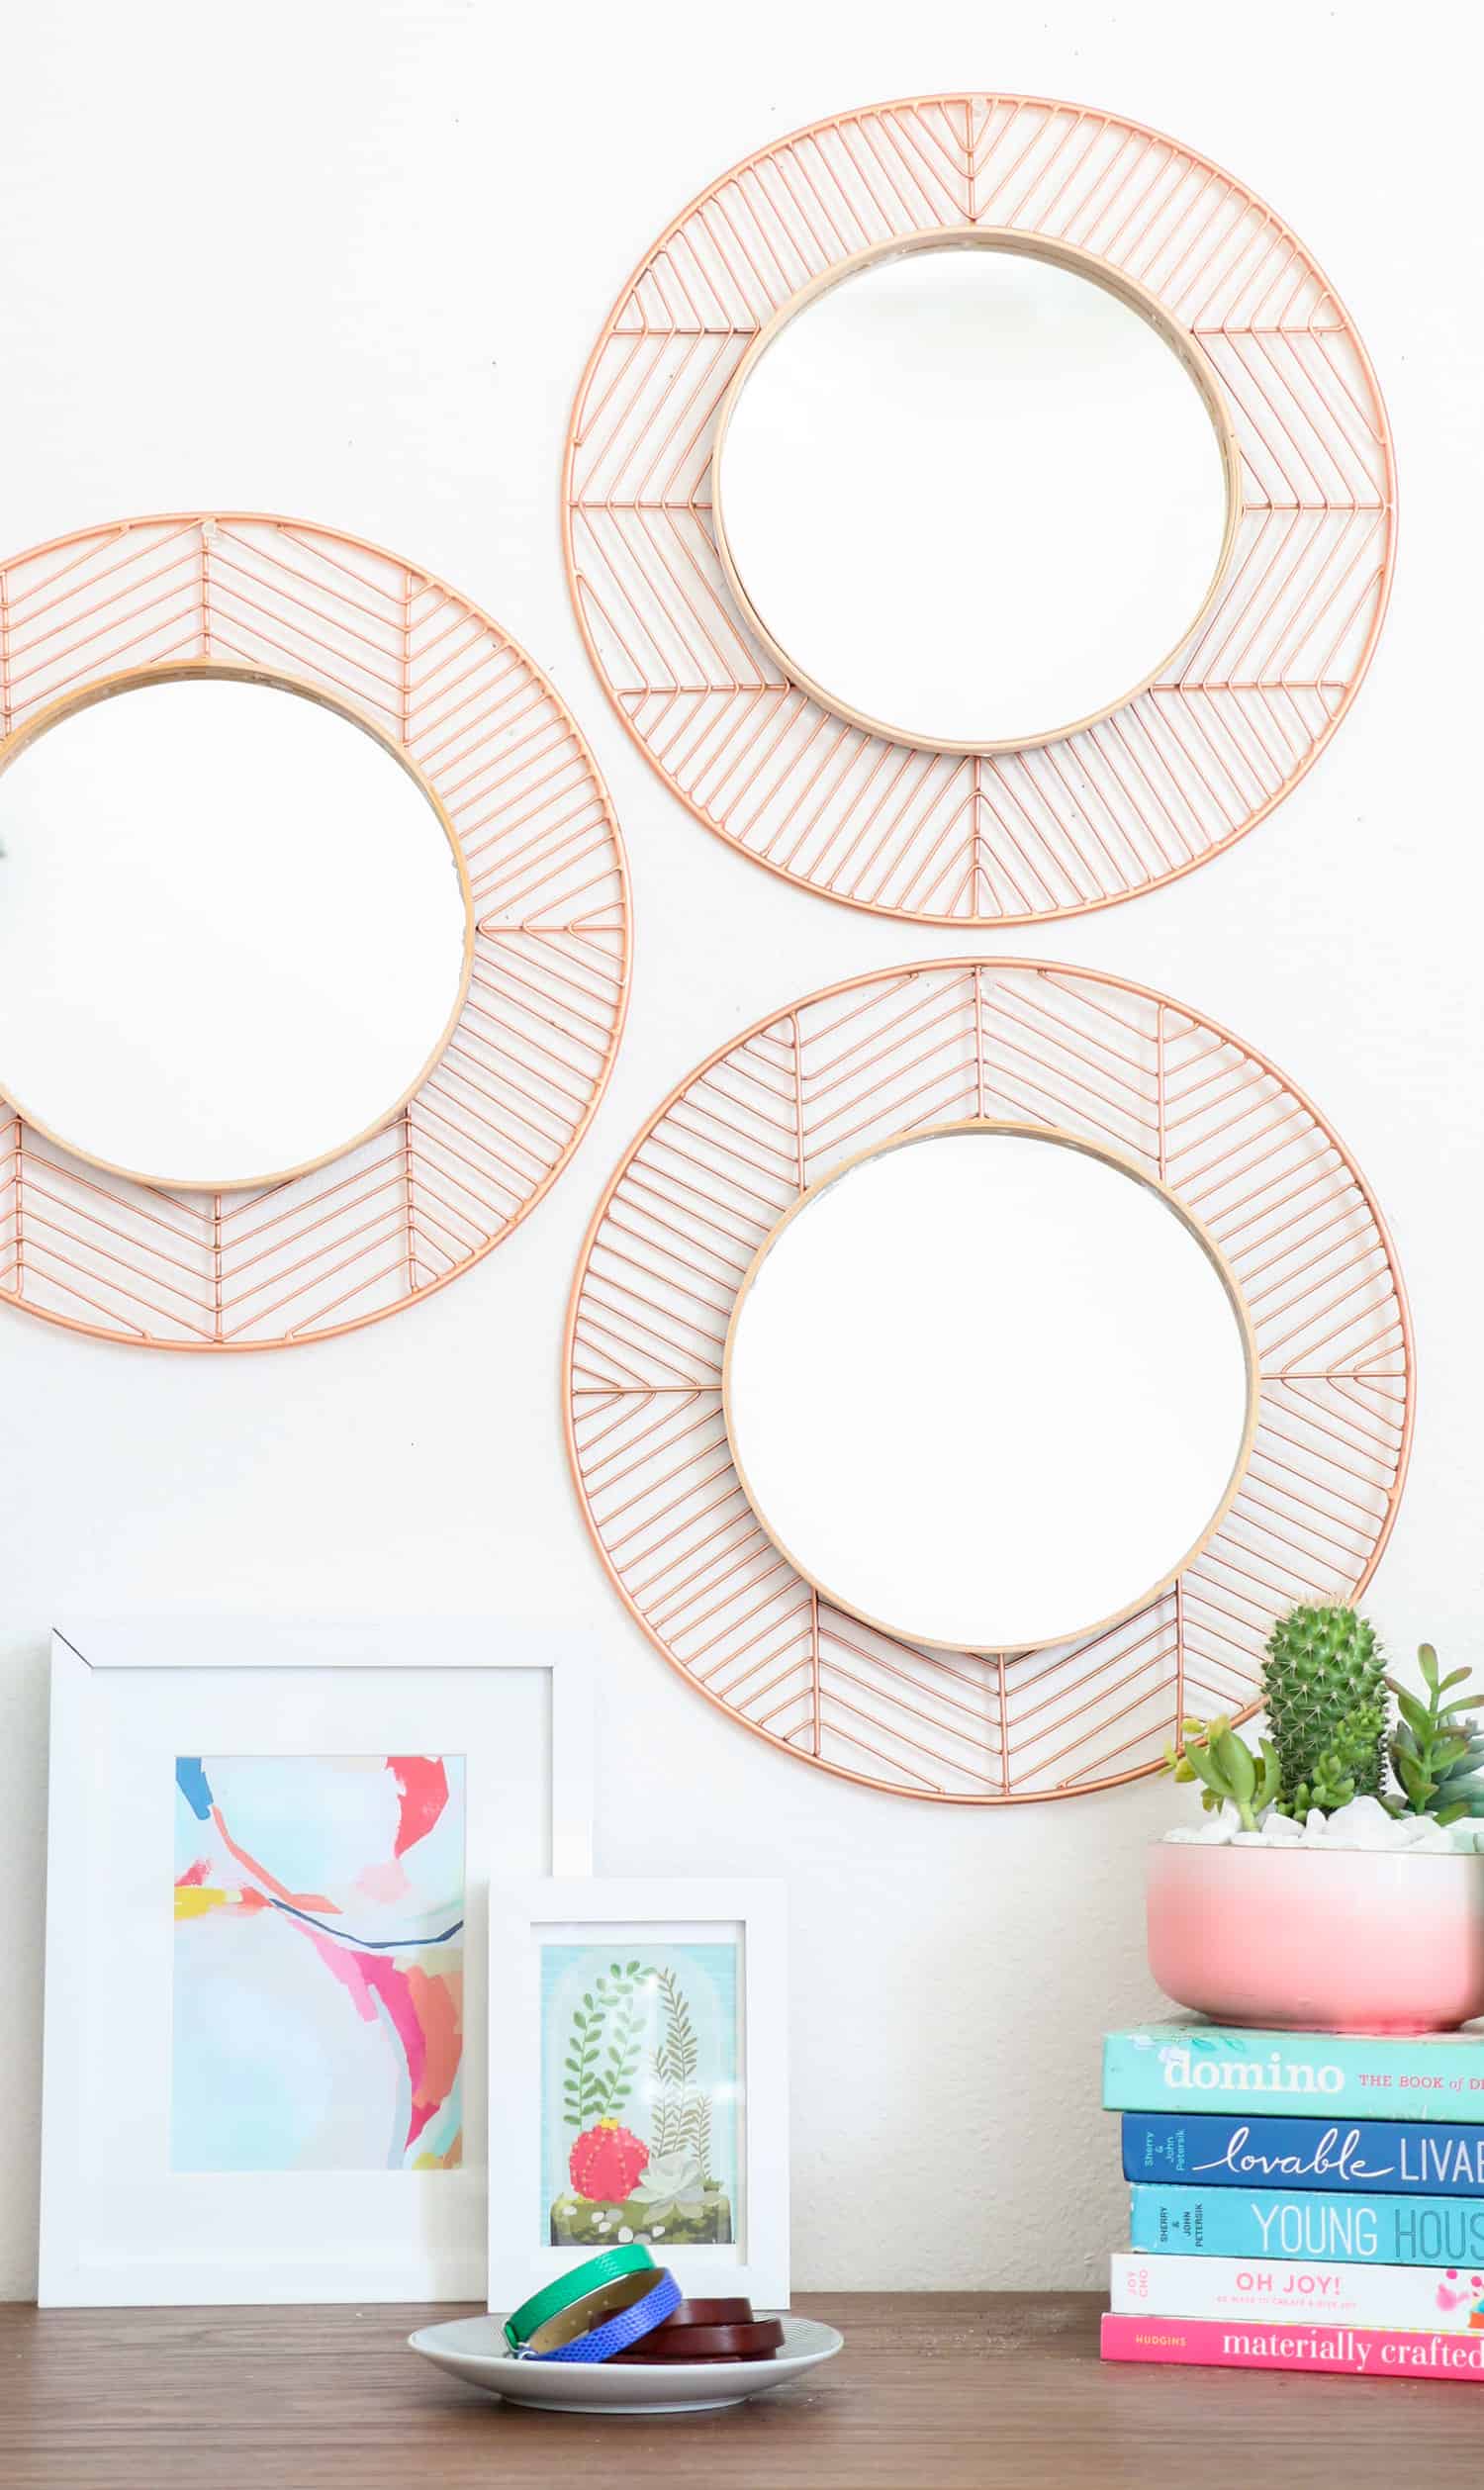 15 Awesome DIY Home Decor Projects Everyone Can Craft